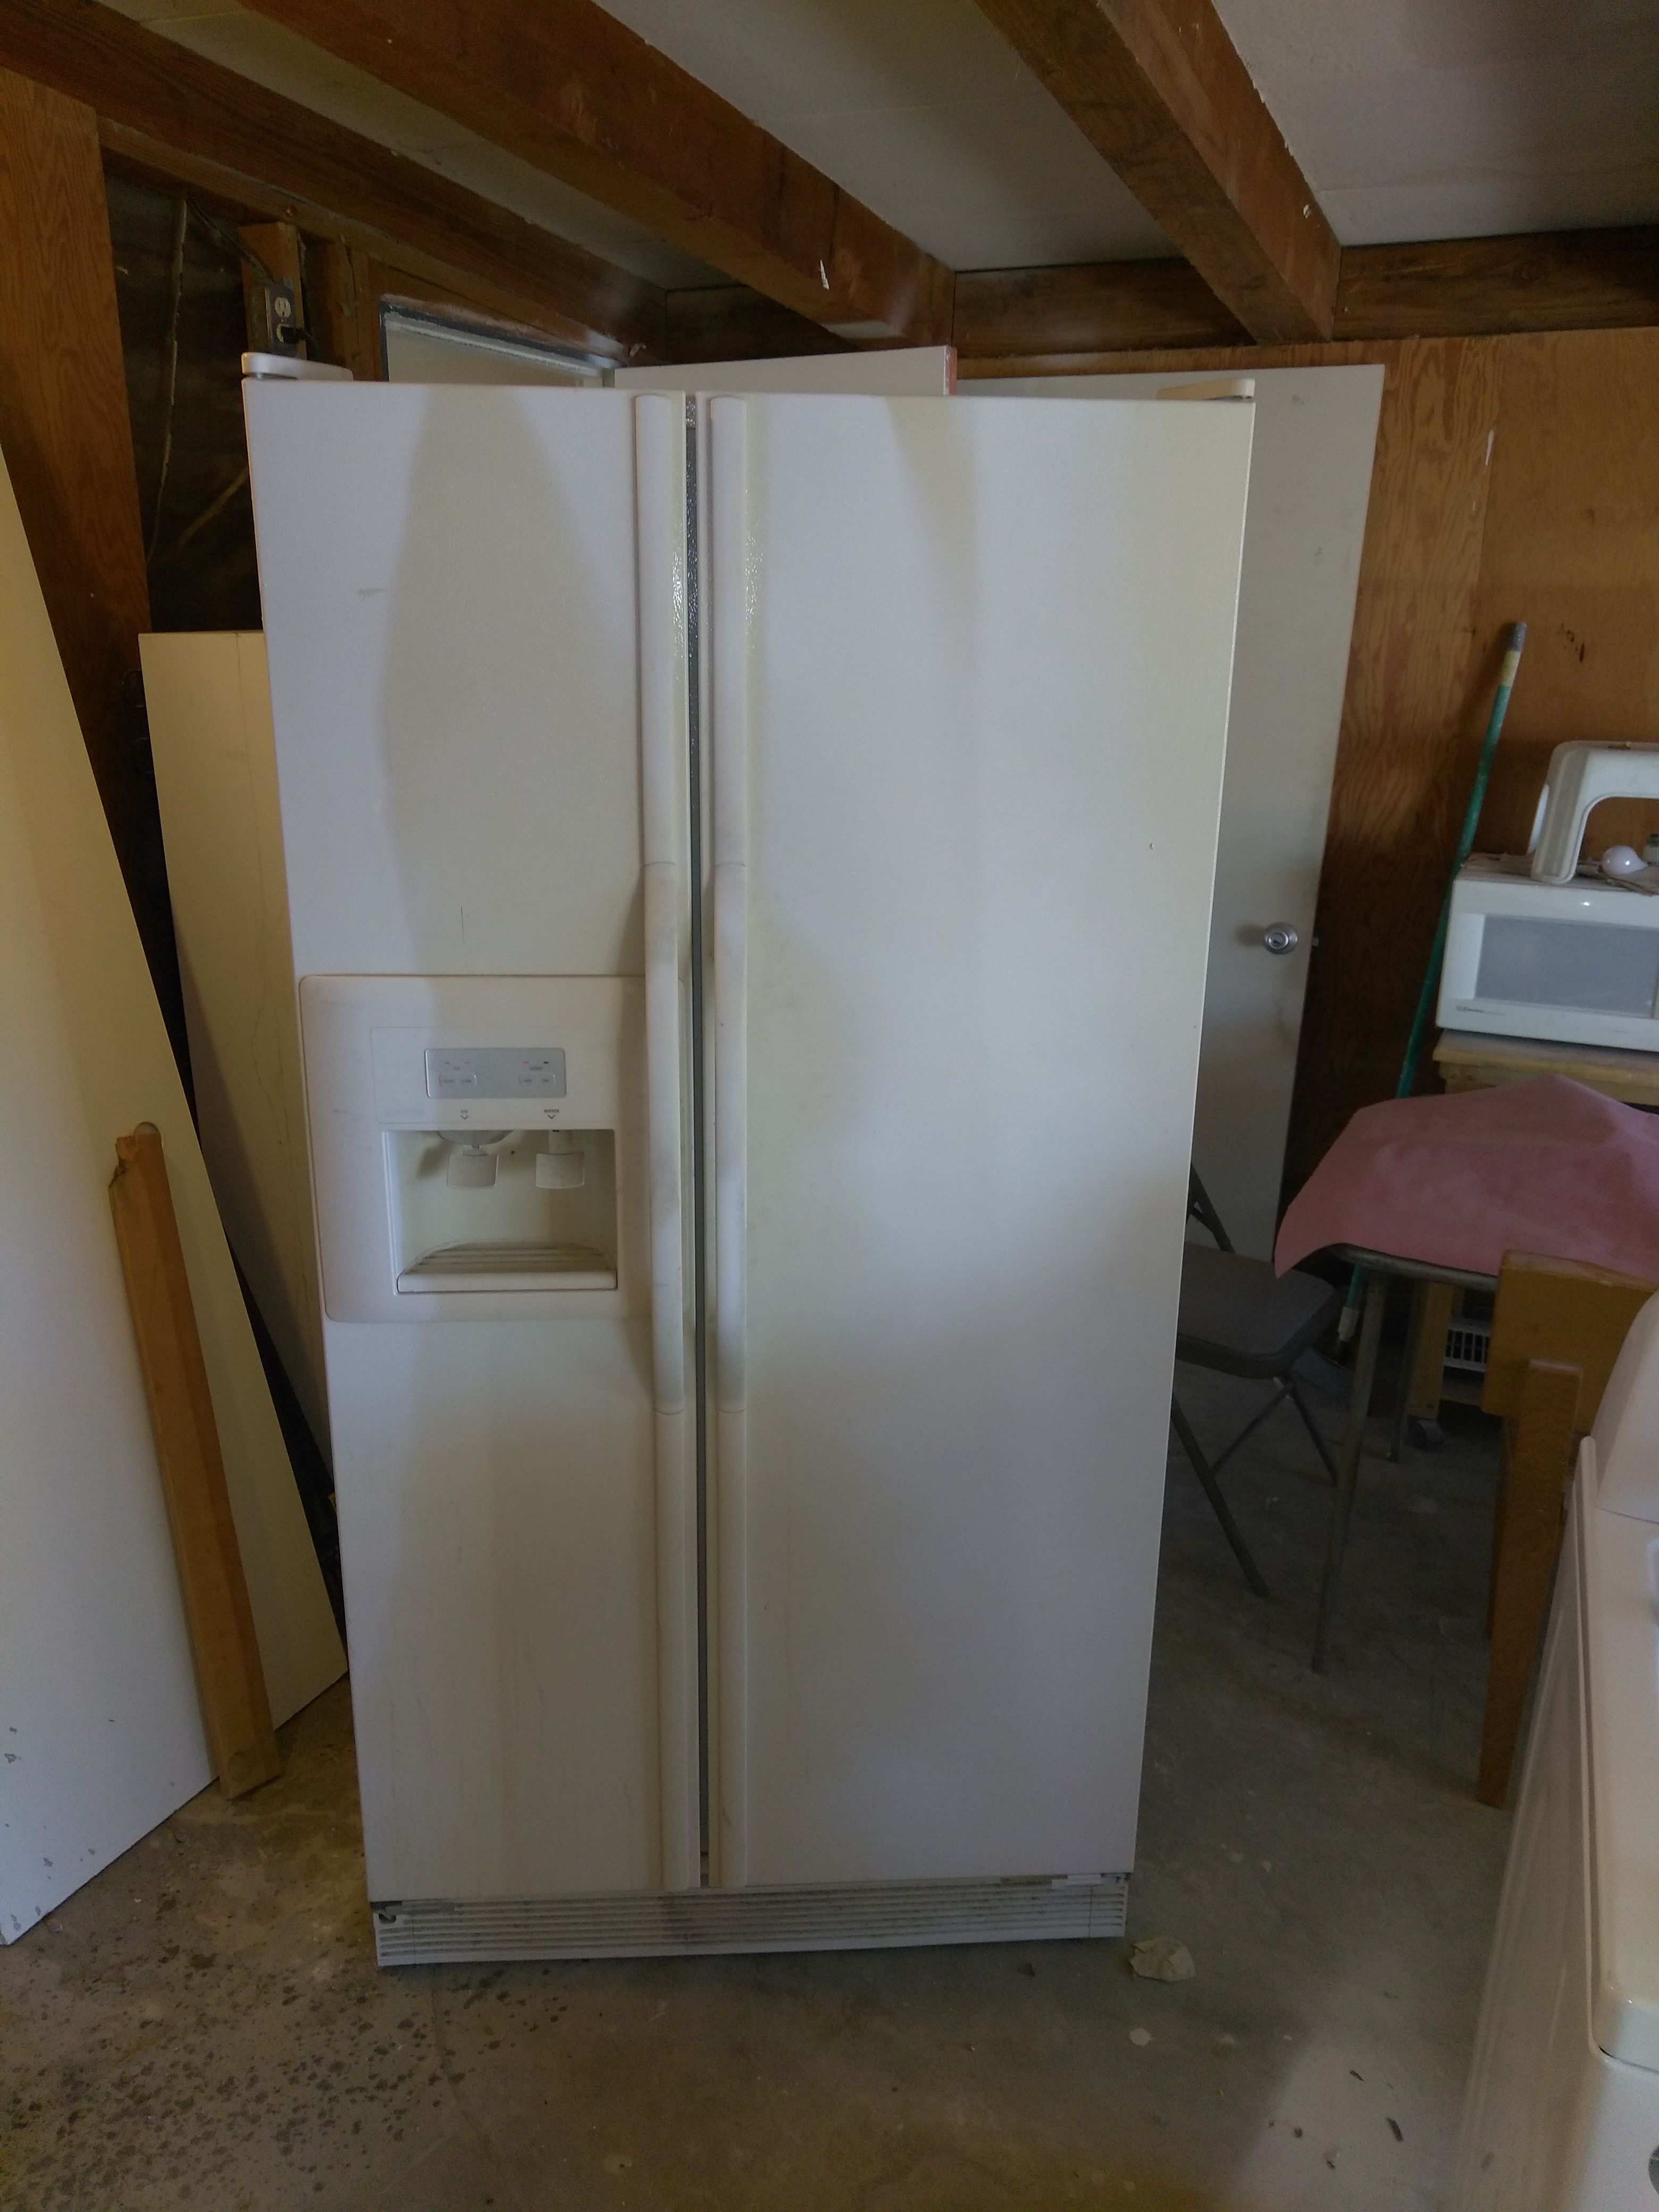 Kenmore side by side refrigerator.